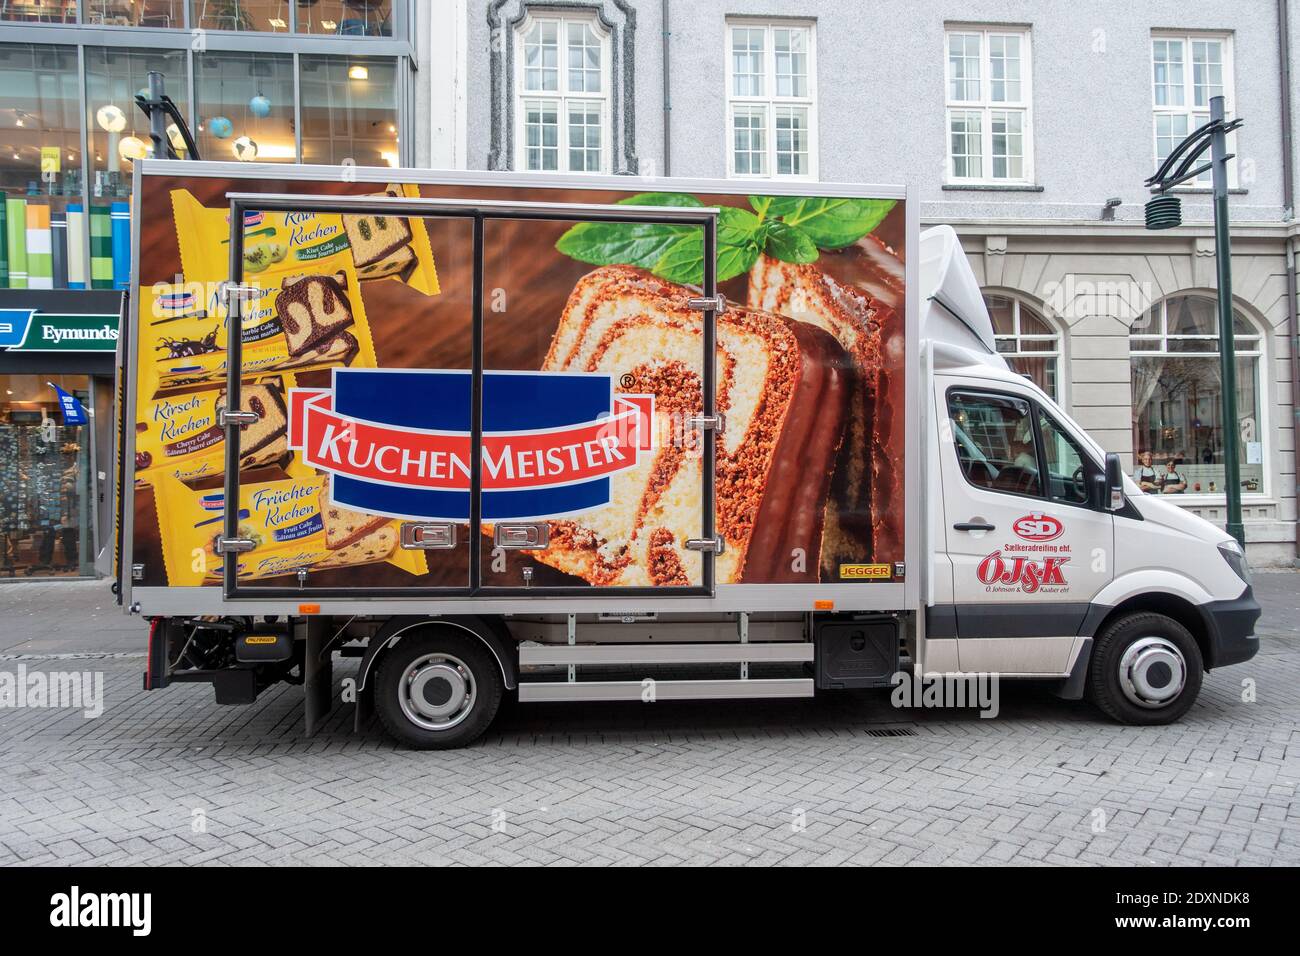 Food Service Delivery Truck Of Ó. Johnson & Kaaber With Cake Advertising For Kuchen Meister Brand In Reykjavik Iceland Stock Photo